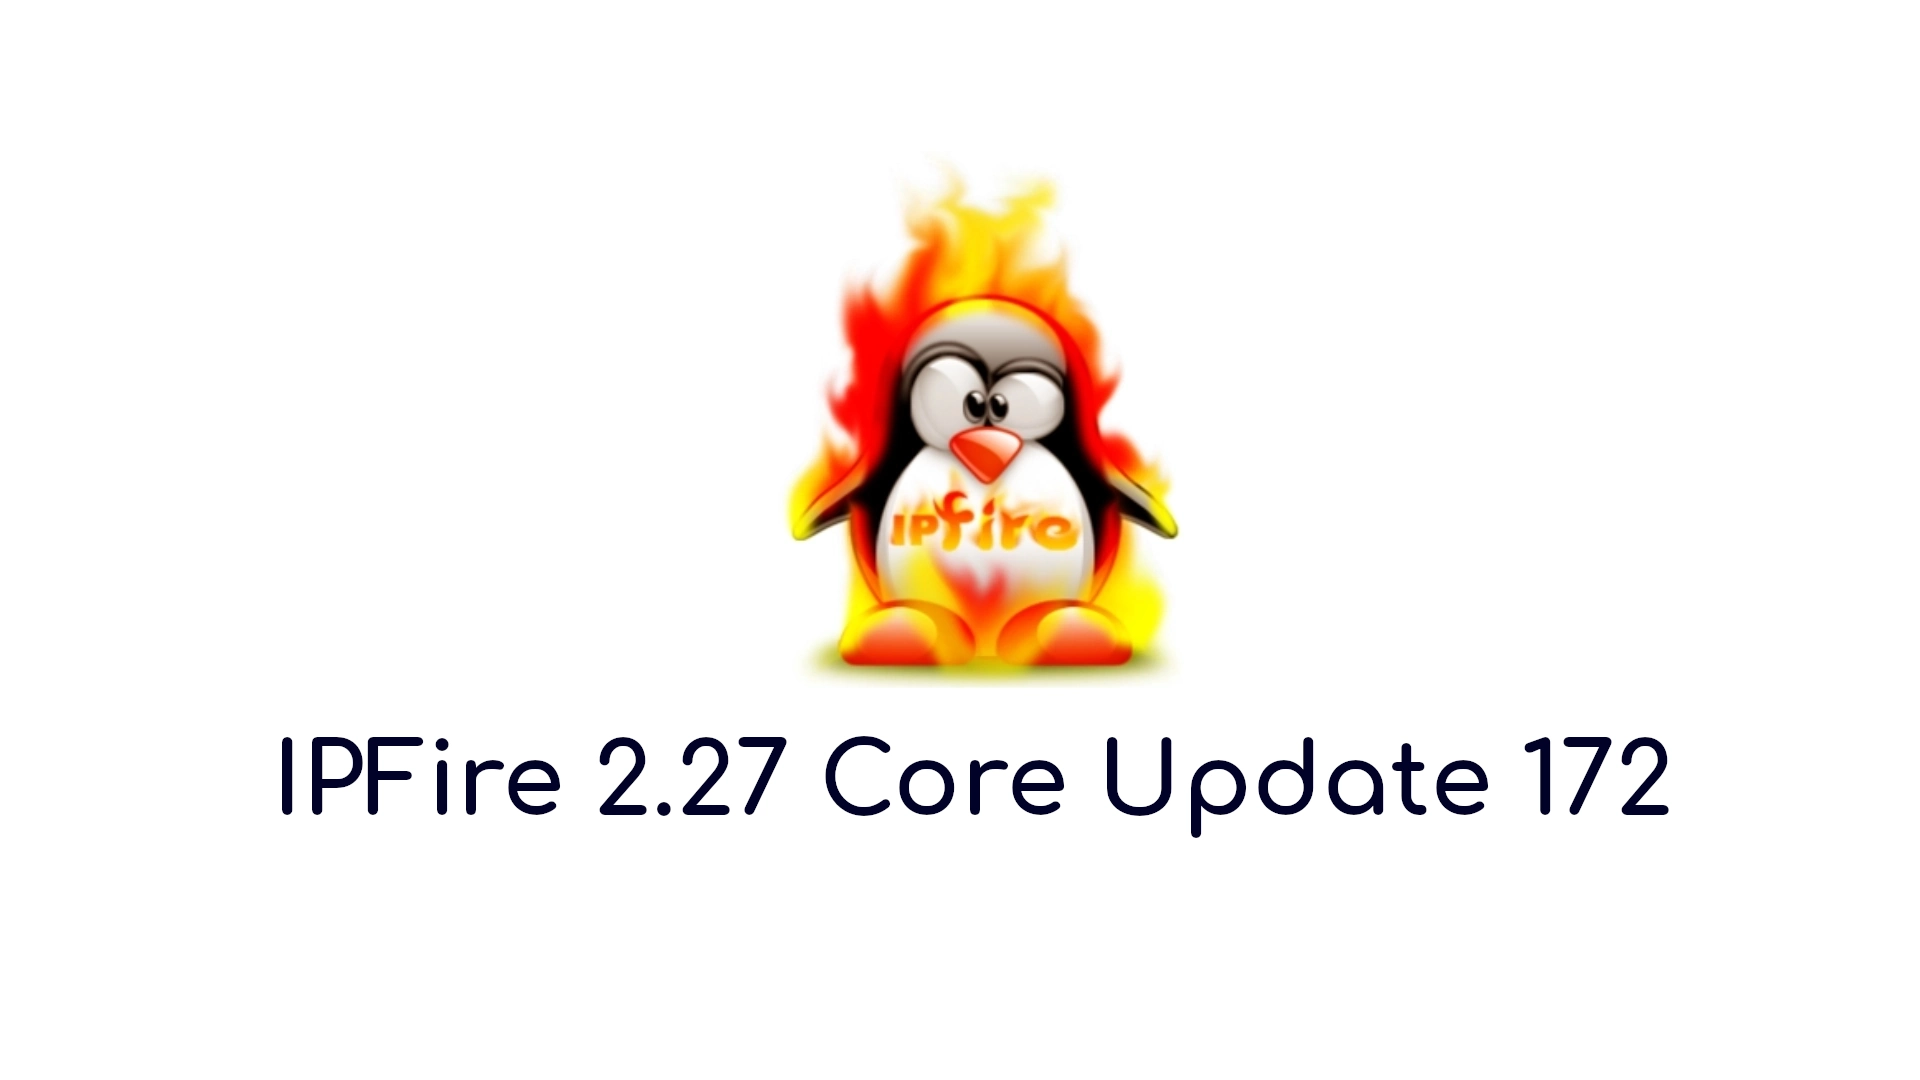 Latest IPFire Hardened Linux Firewall Distro Release Future-Proofs VPN Cryptography